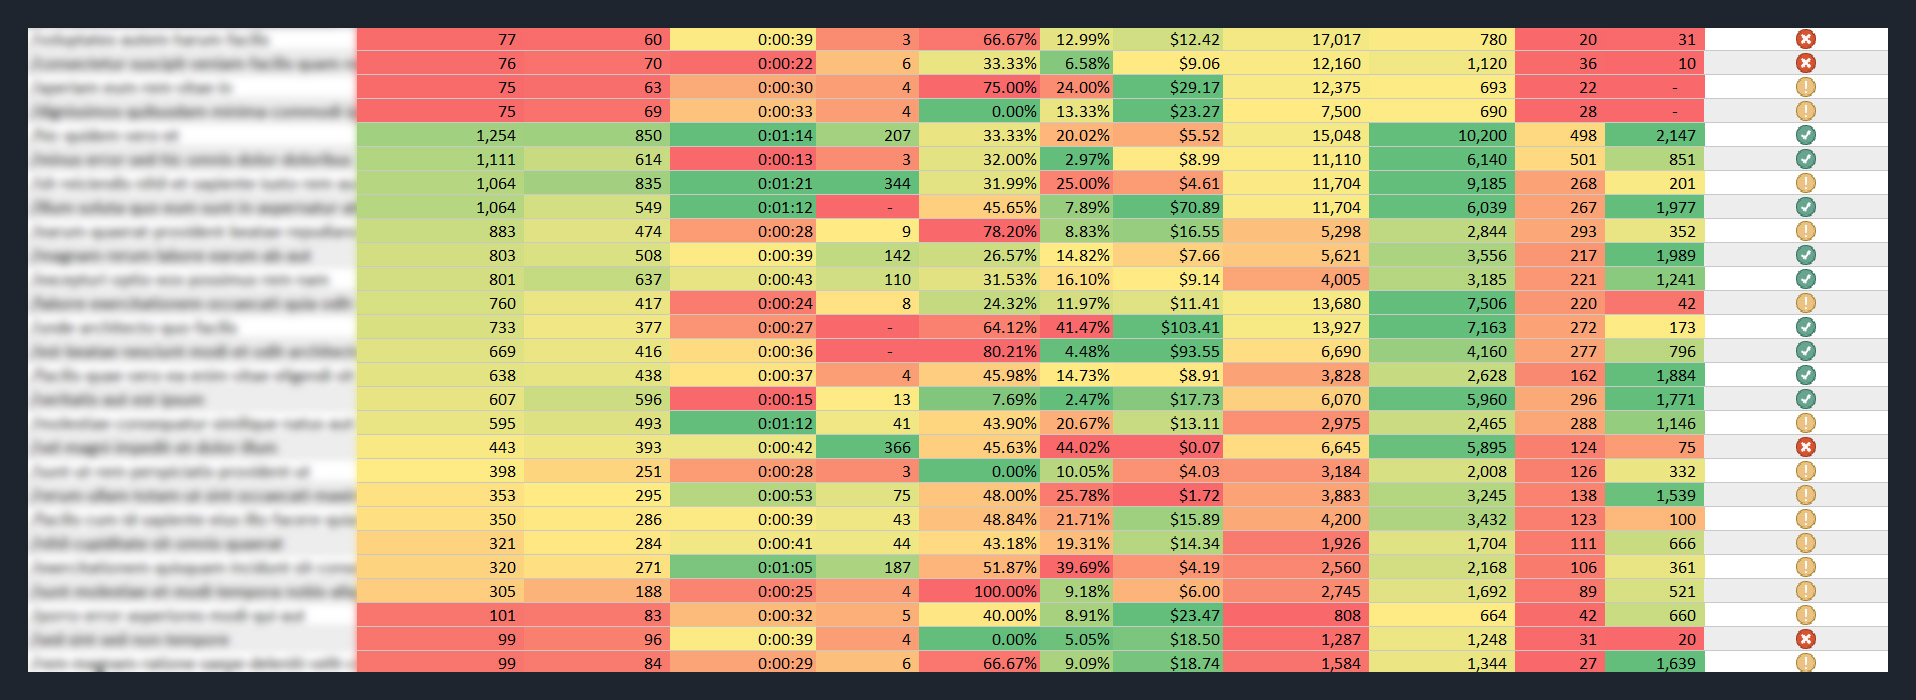 Content audit spreadsheet using a color scale to represent the evaluation of data points on a page-by-page basis